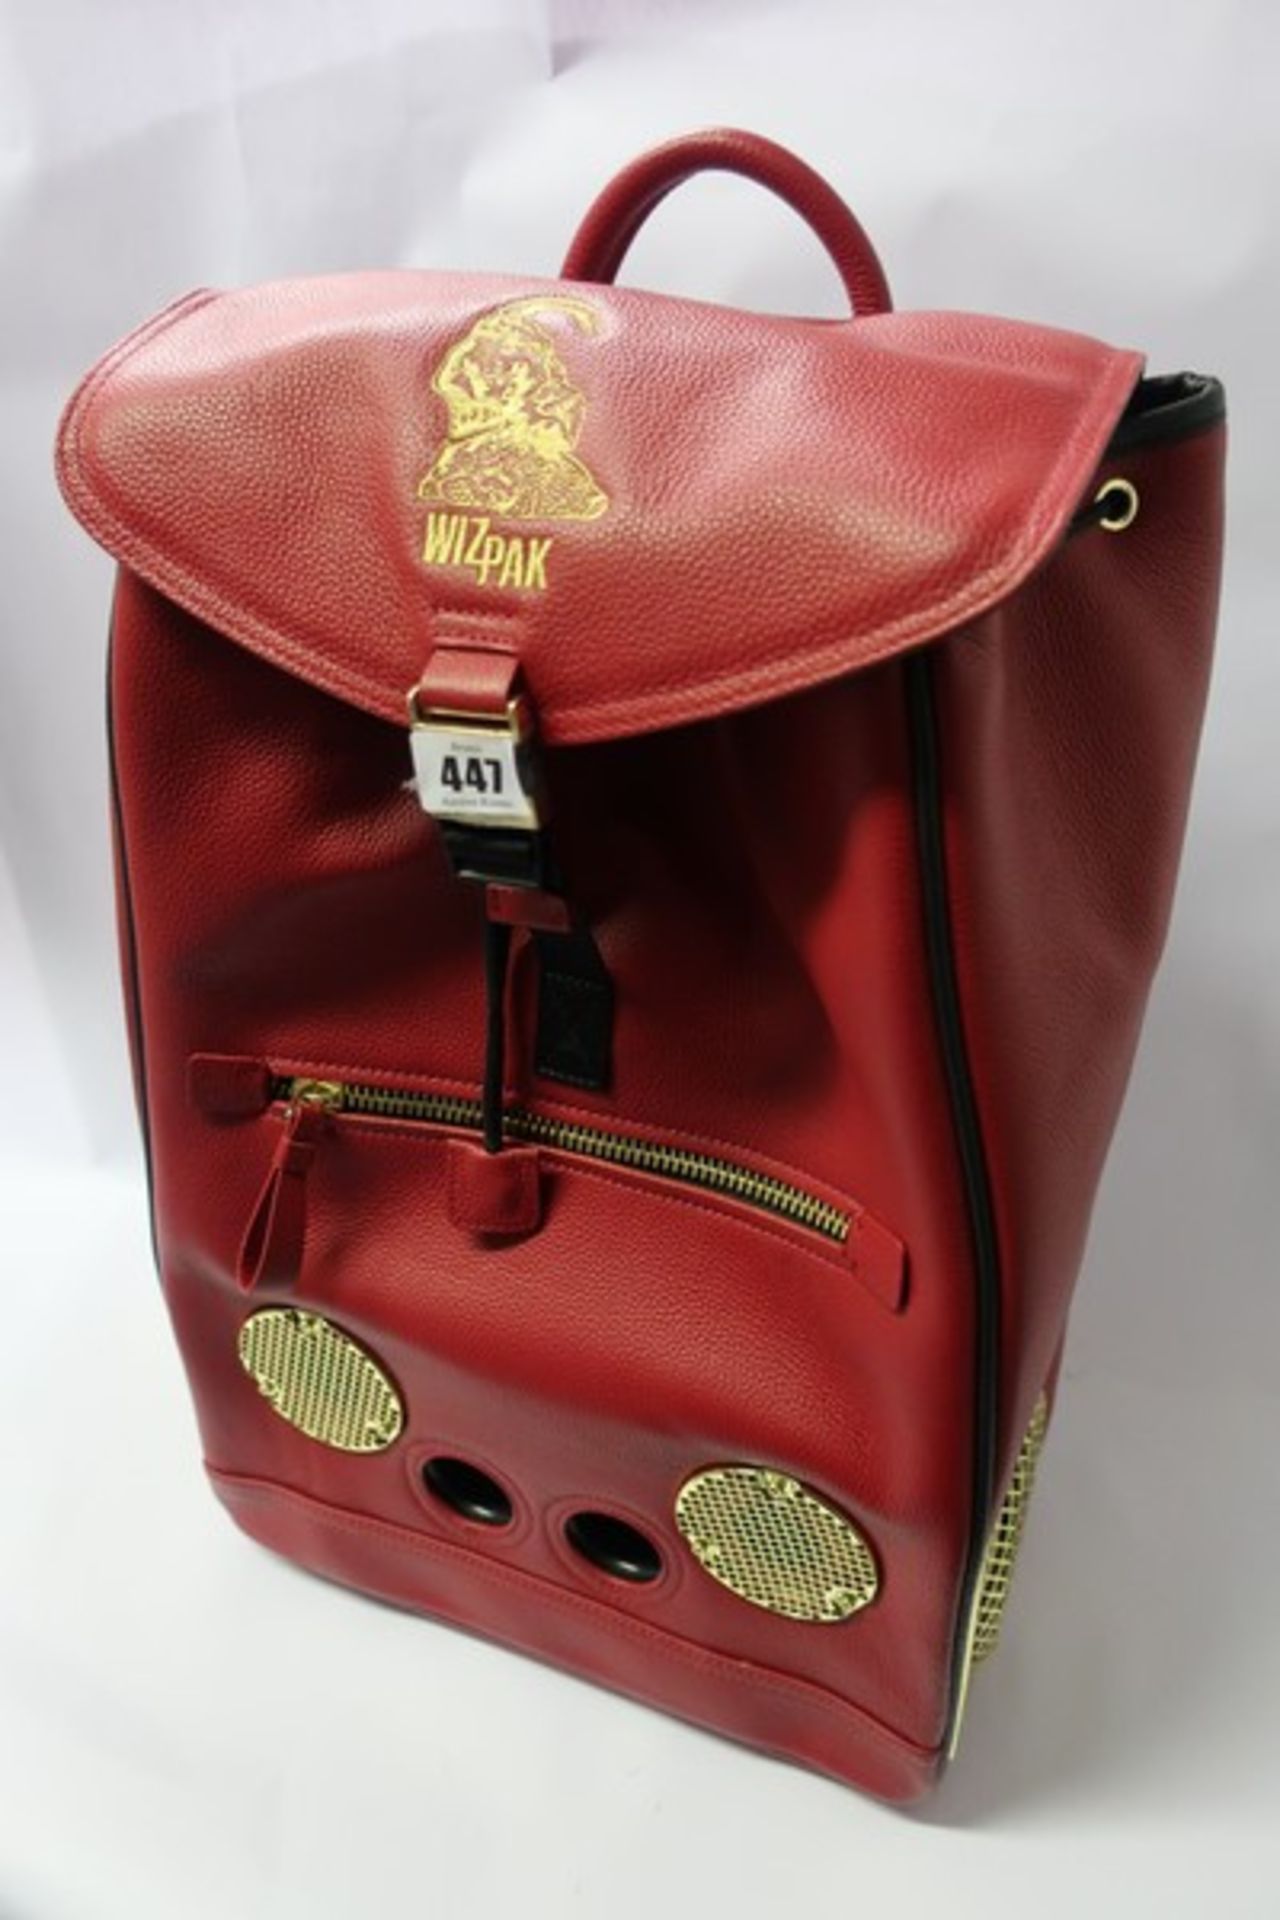 An as new WizPak sound system backpack in red leather with dust bag. - Image 7 of 7